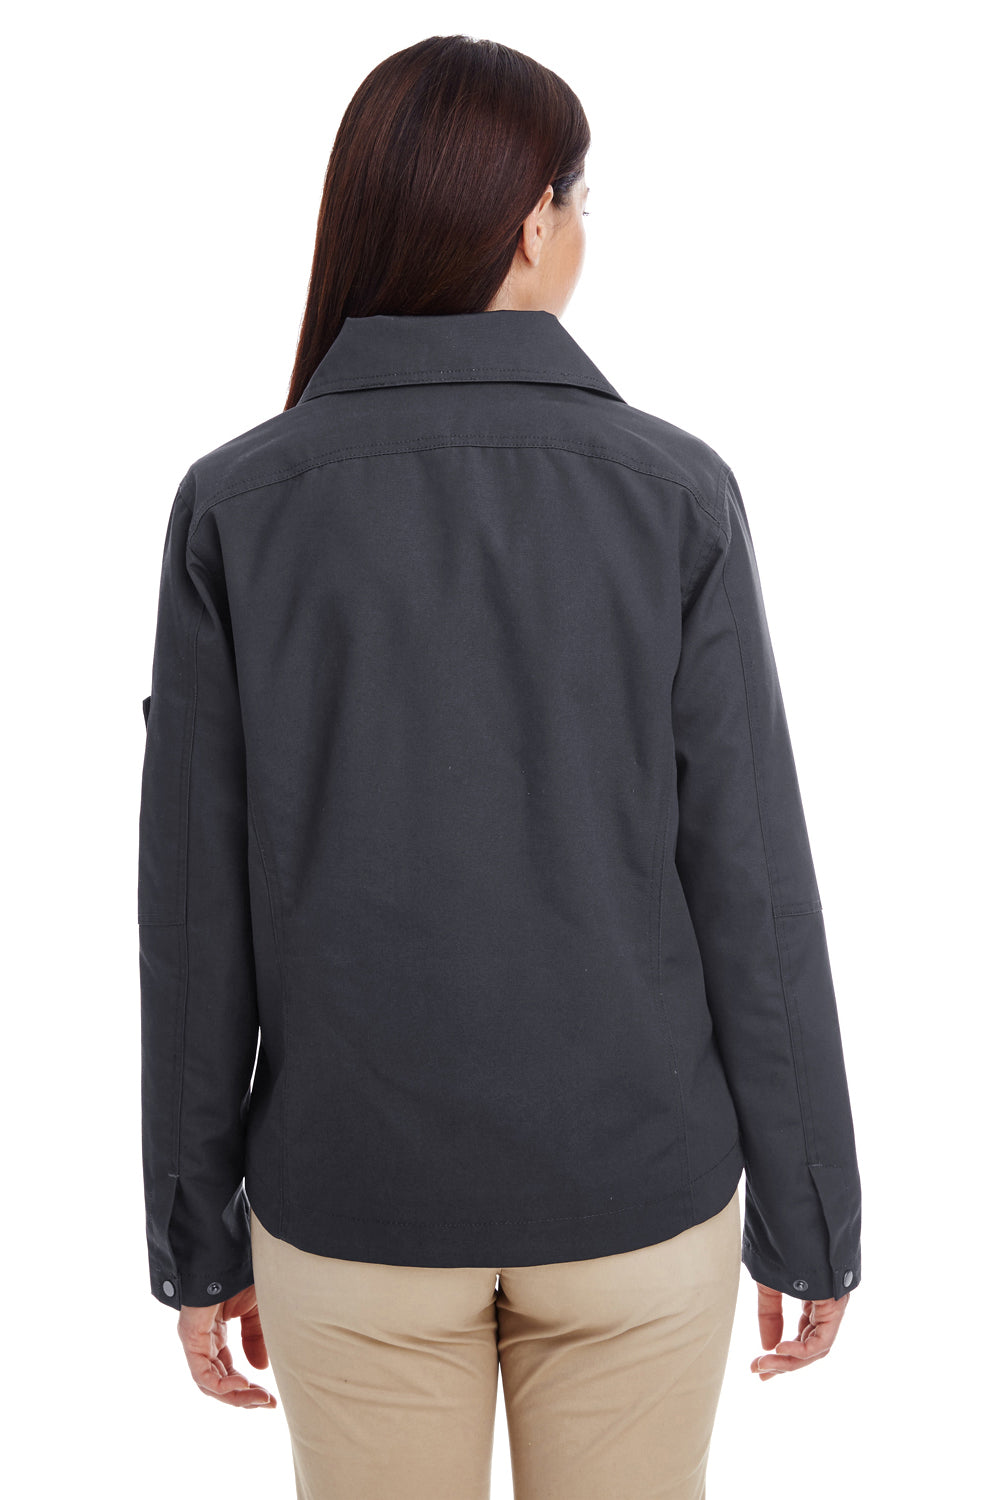 Harriton M705W Womens Auxiliary Water Resistant Canvas Full Zip Jacket Charcoal Grey Back